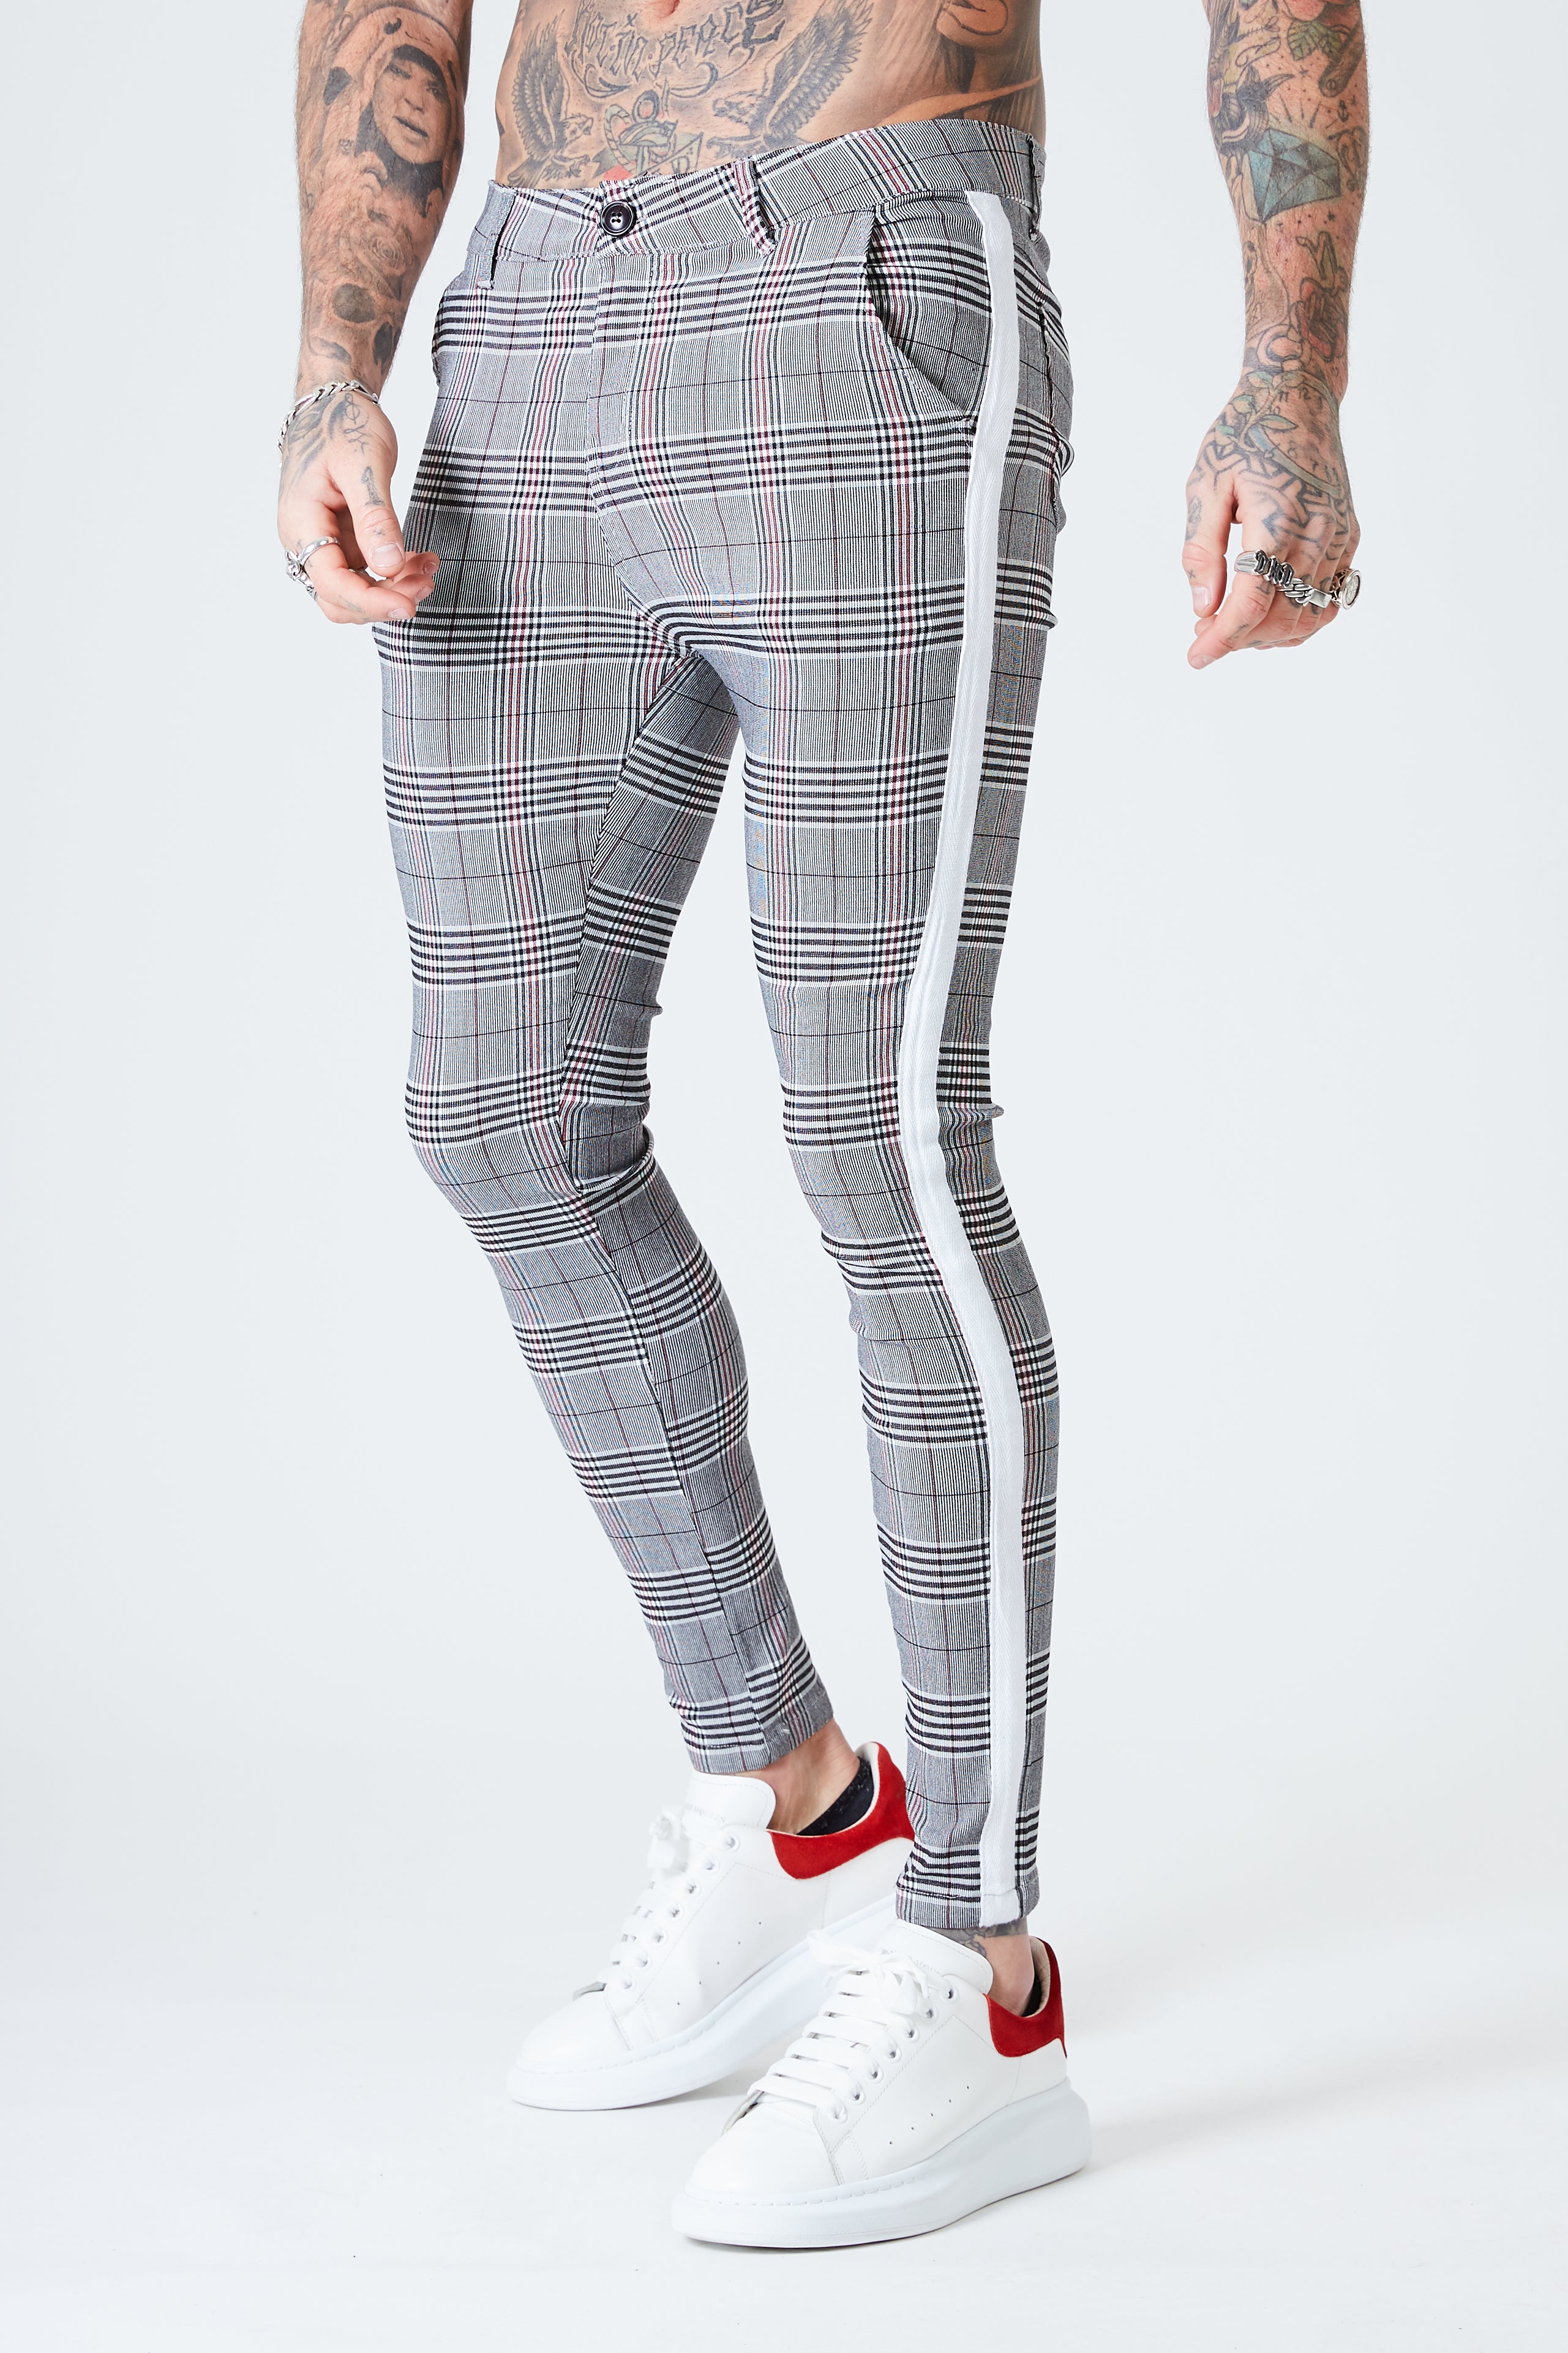 grey and black checkered trousers